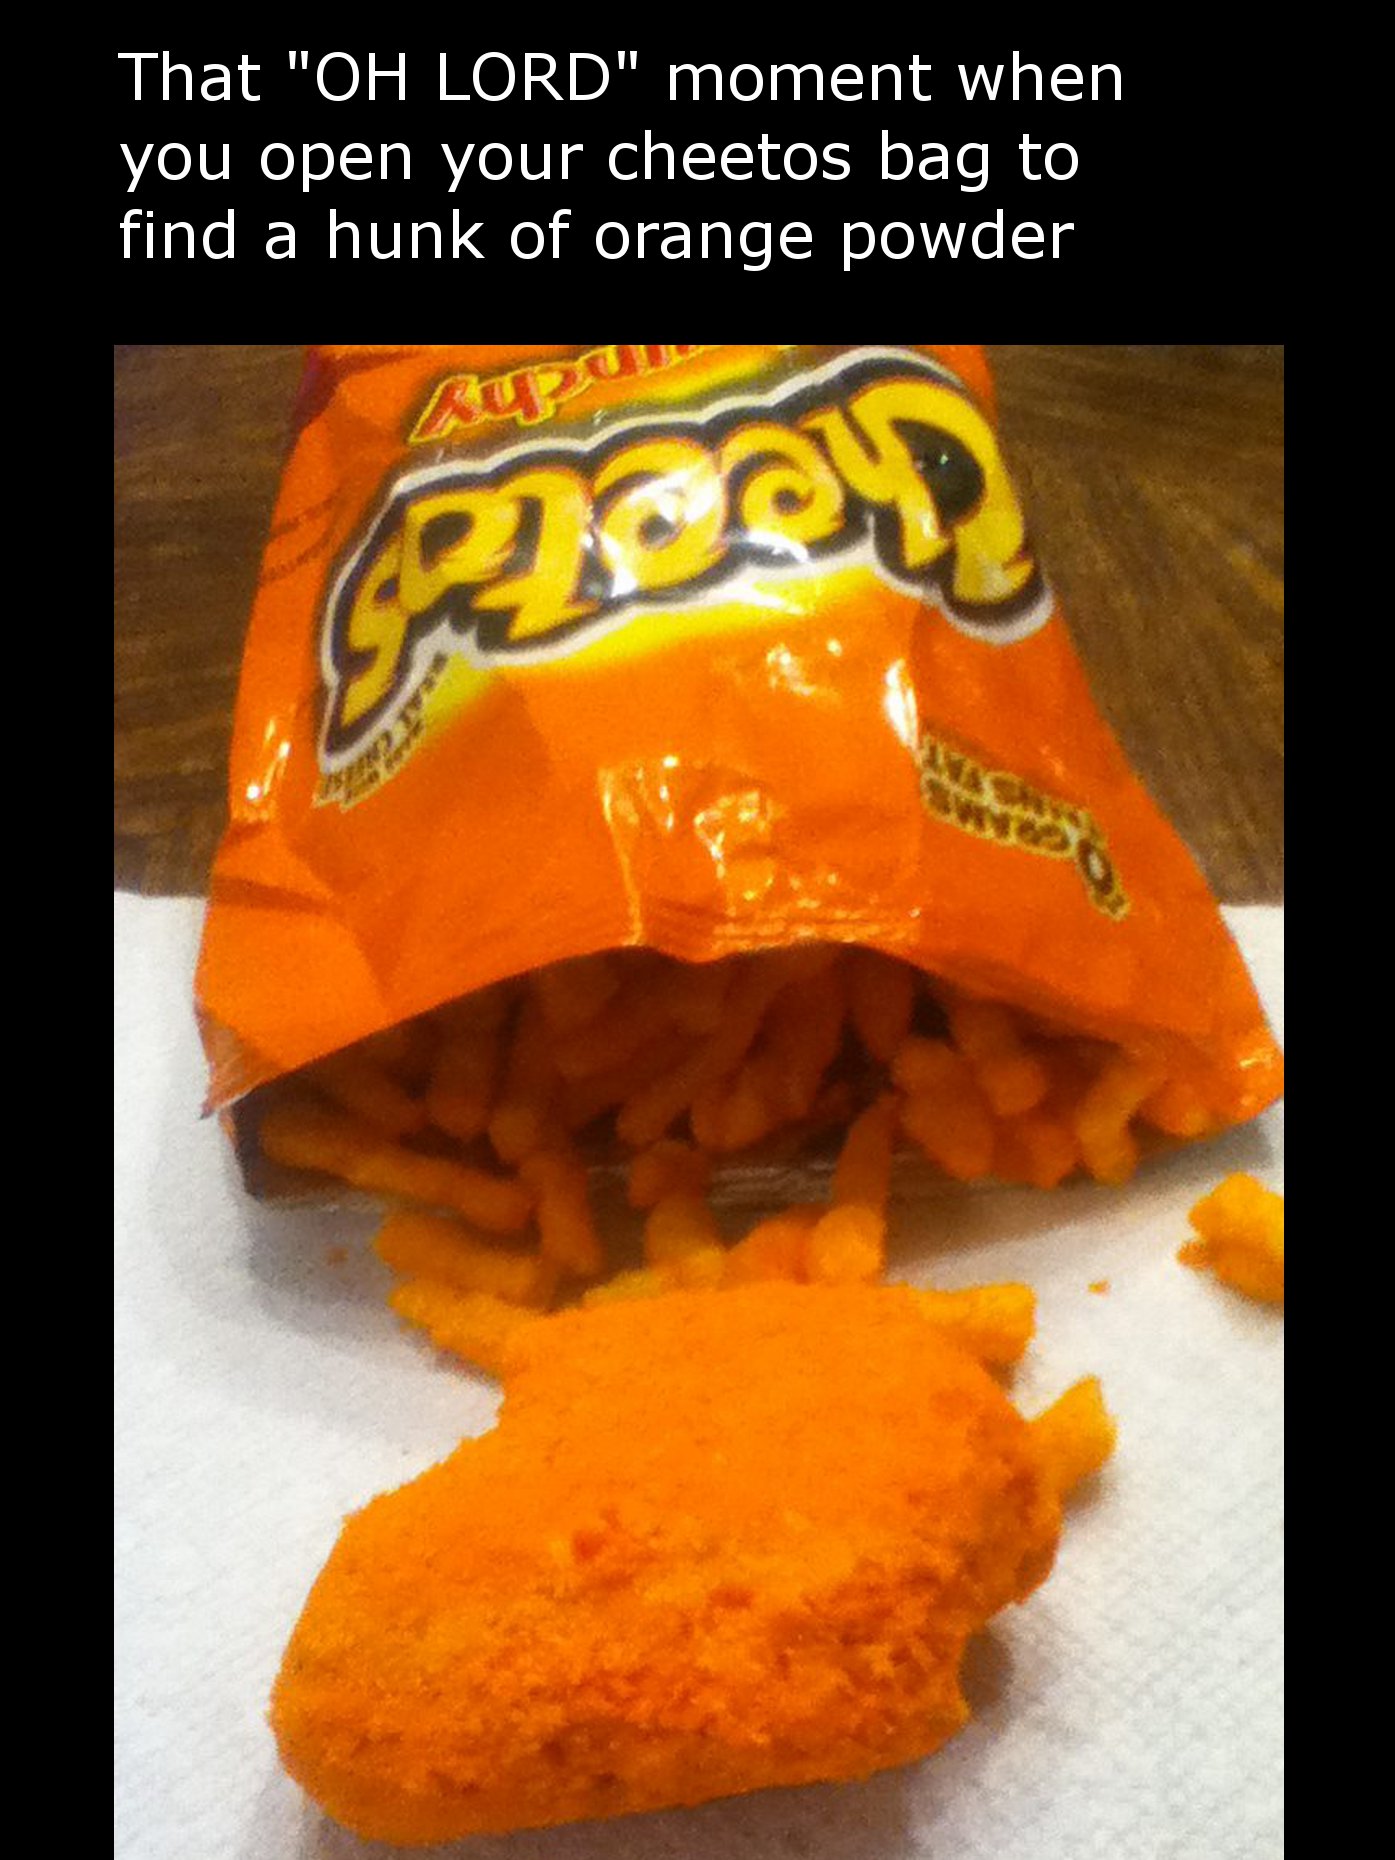 The OH LORD moment when you find hunk of orange powder in your cheetos bag.